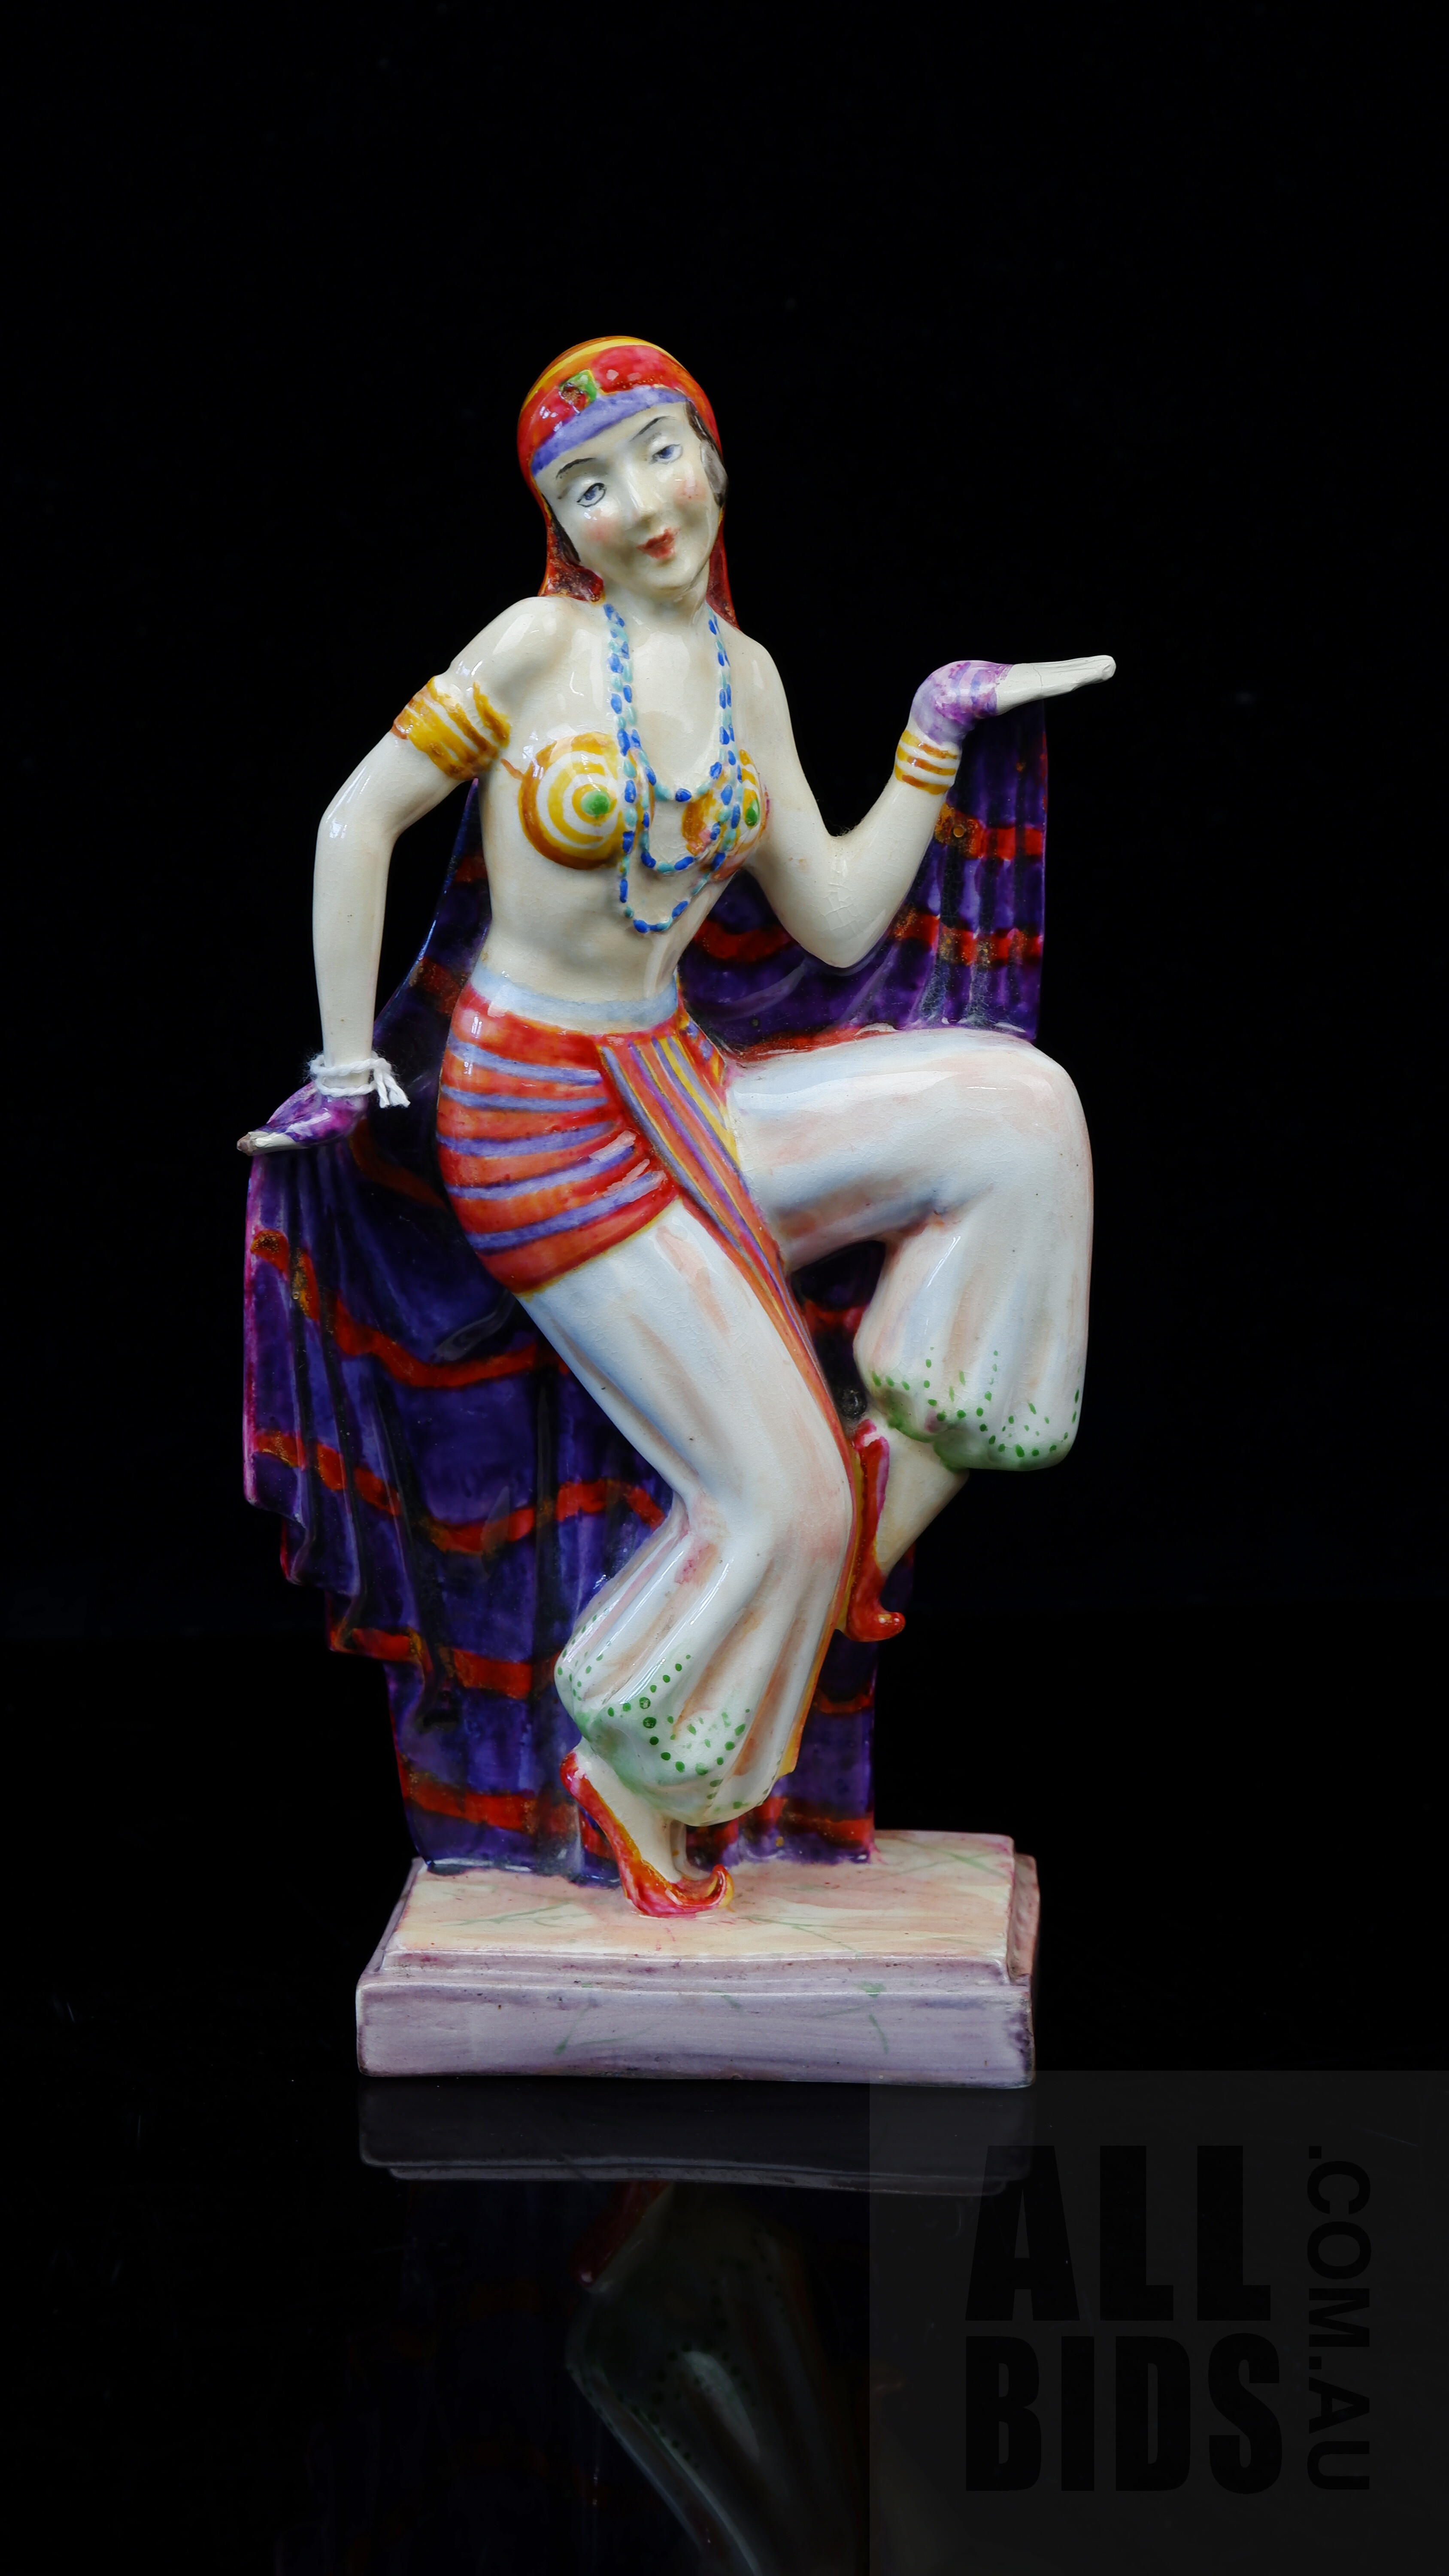 'Atlas China at Stoke on Trent Hand Figure of Eastern Dancing Woman'